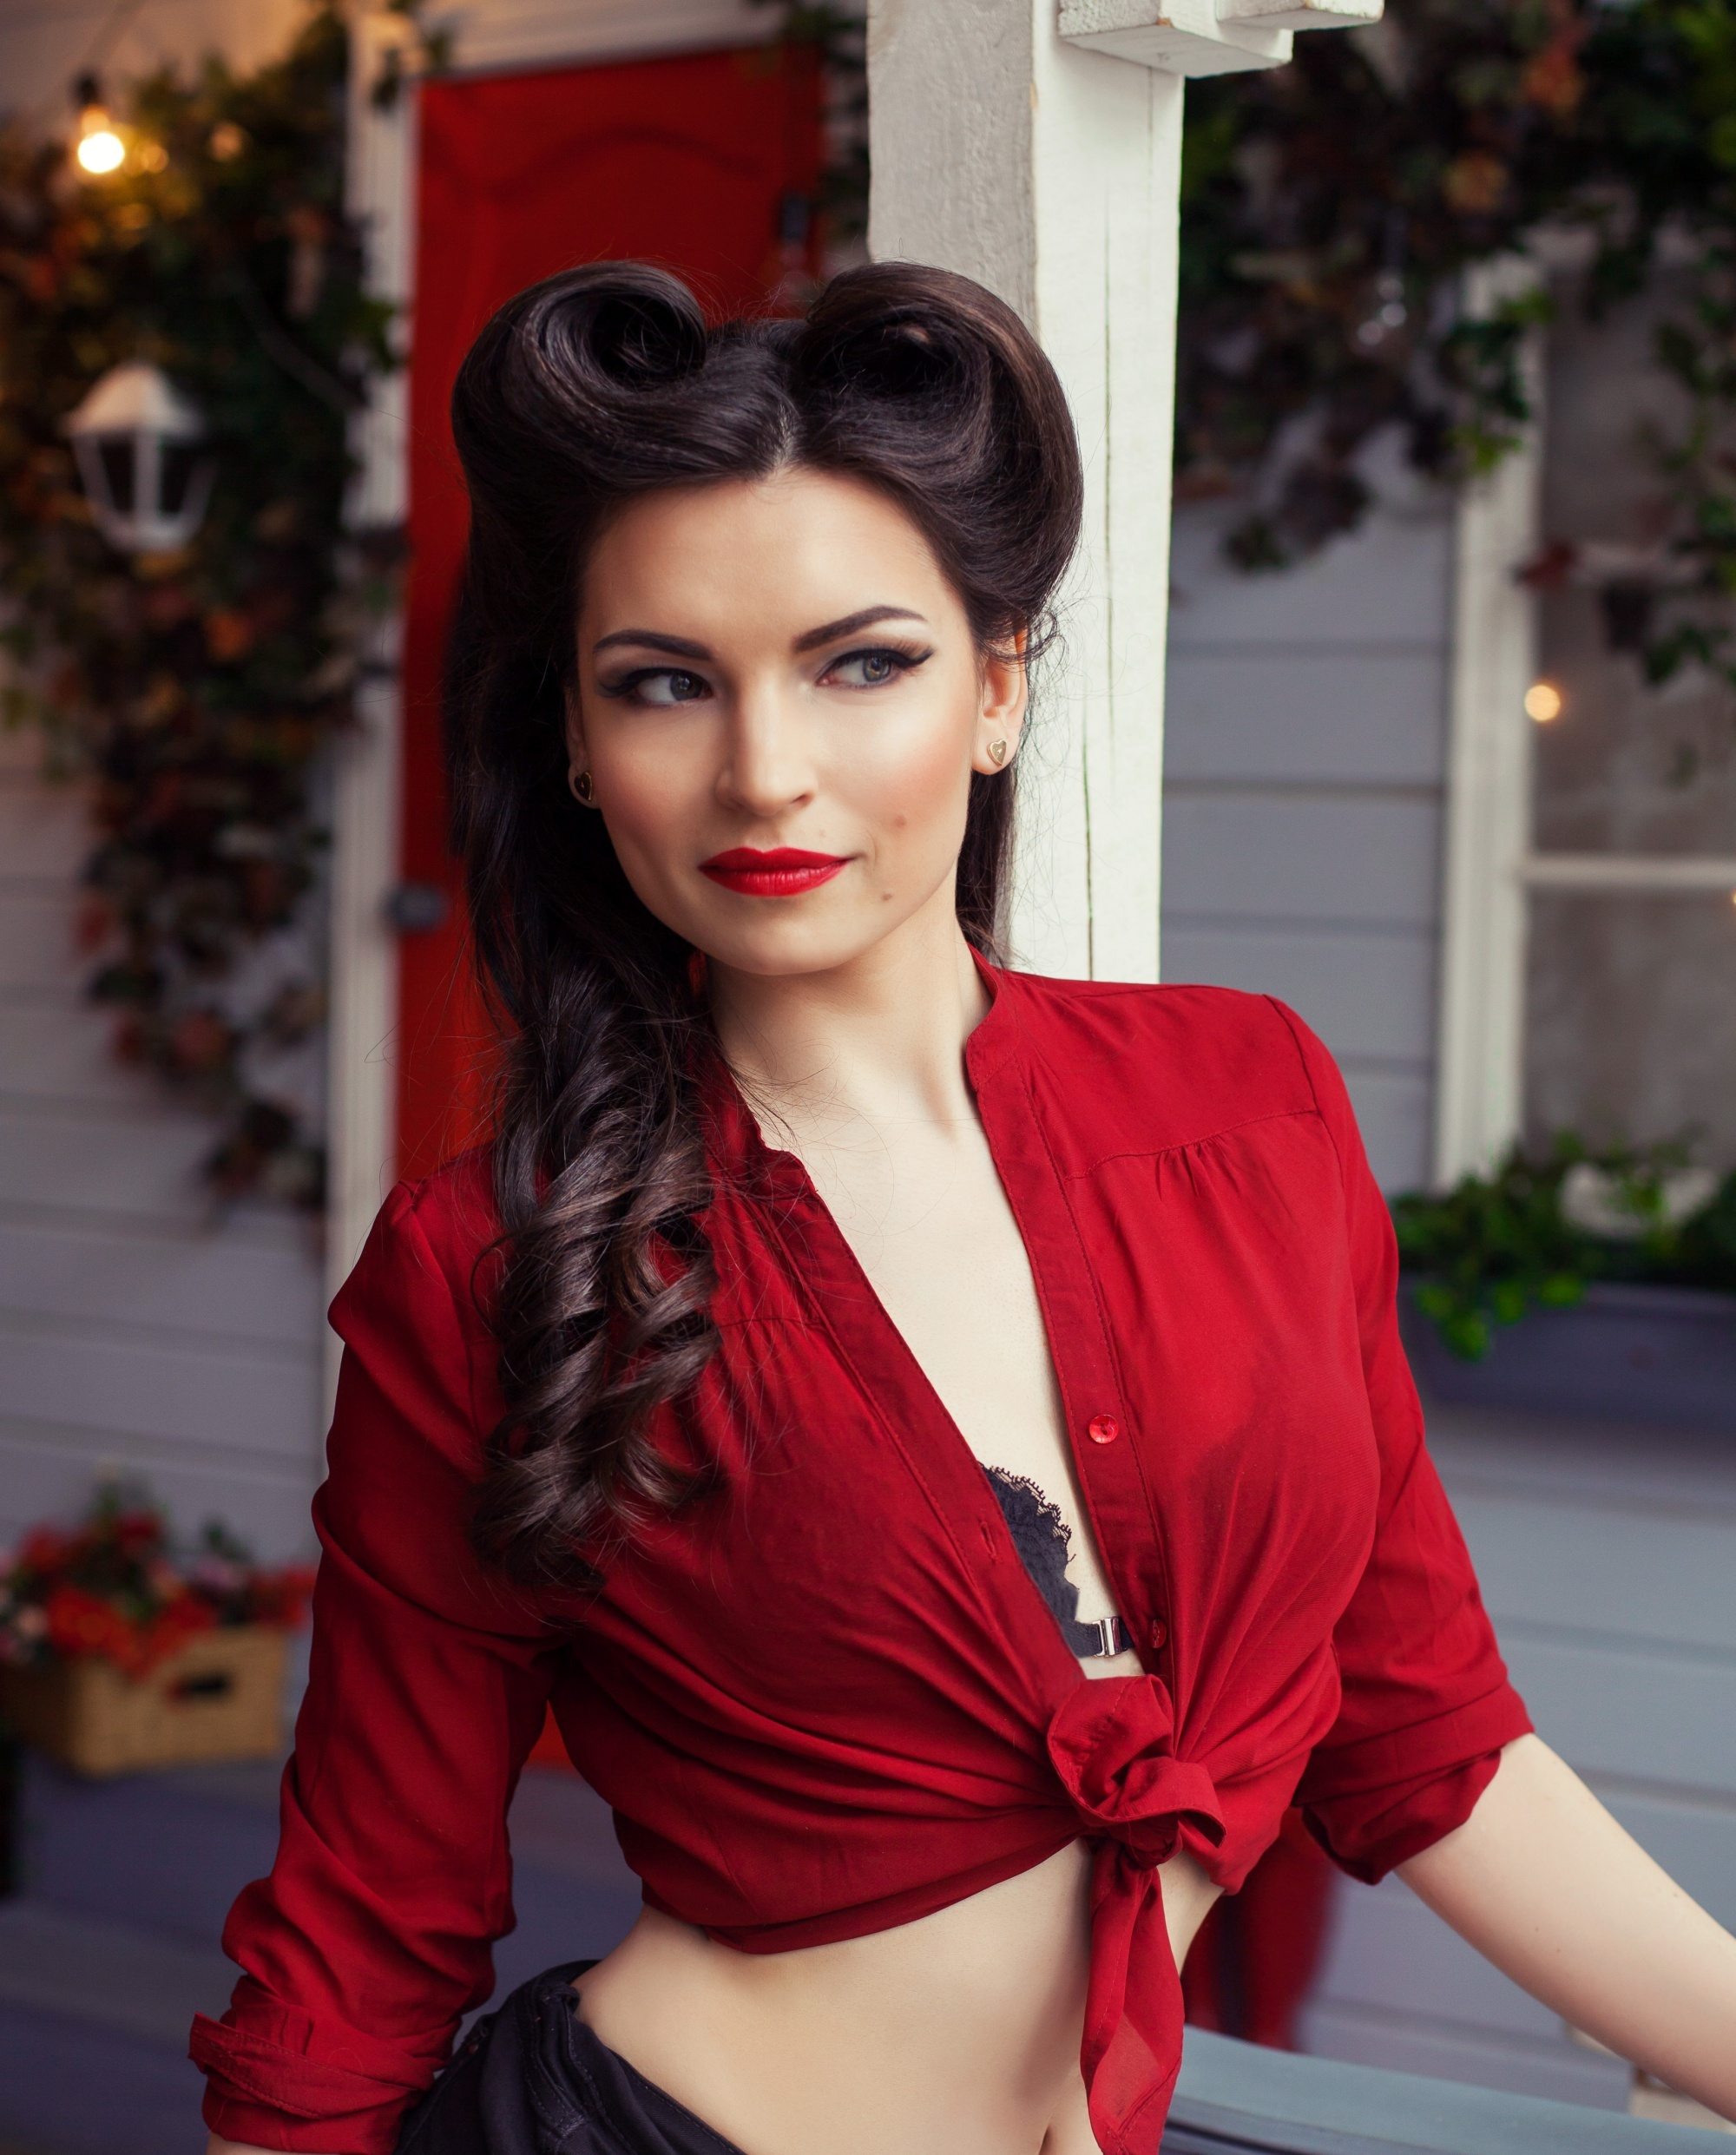 Rockabilly hair: Woman with long hair in a twisted long rockabilly hairdo wearing a red cropped top